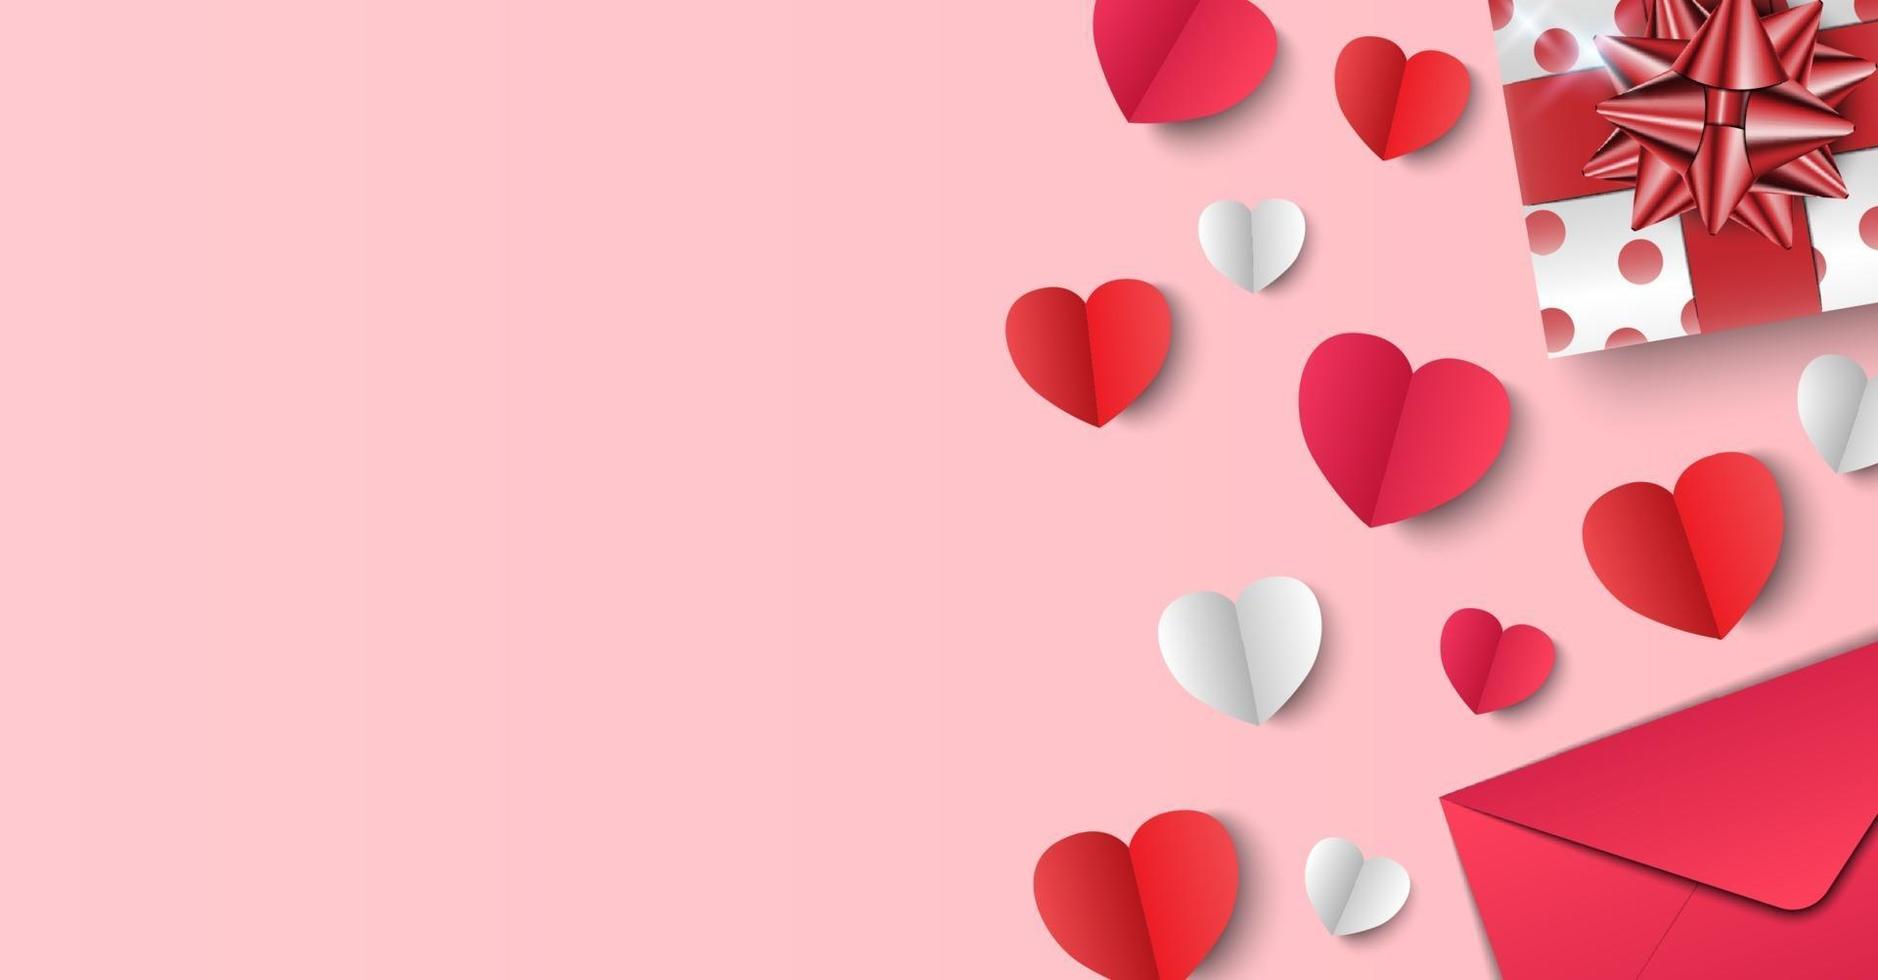 Valentine's Day background, gifts, envelope and paper hearts on pink background, vector illustration